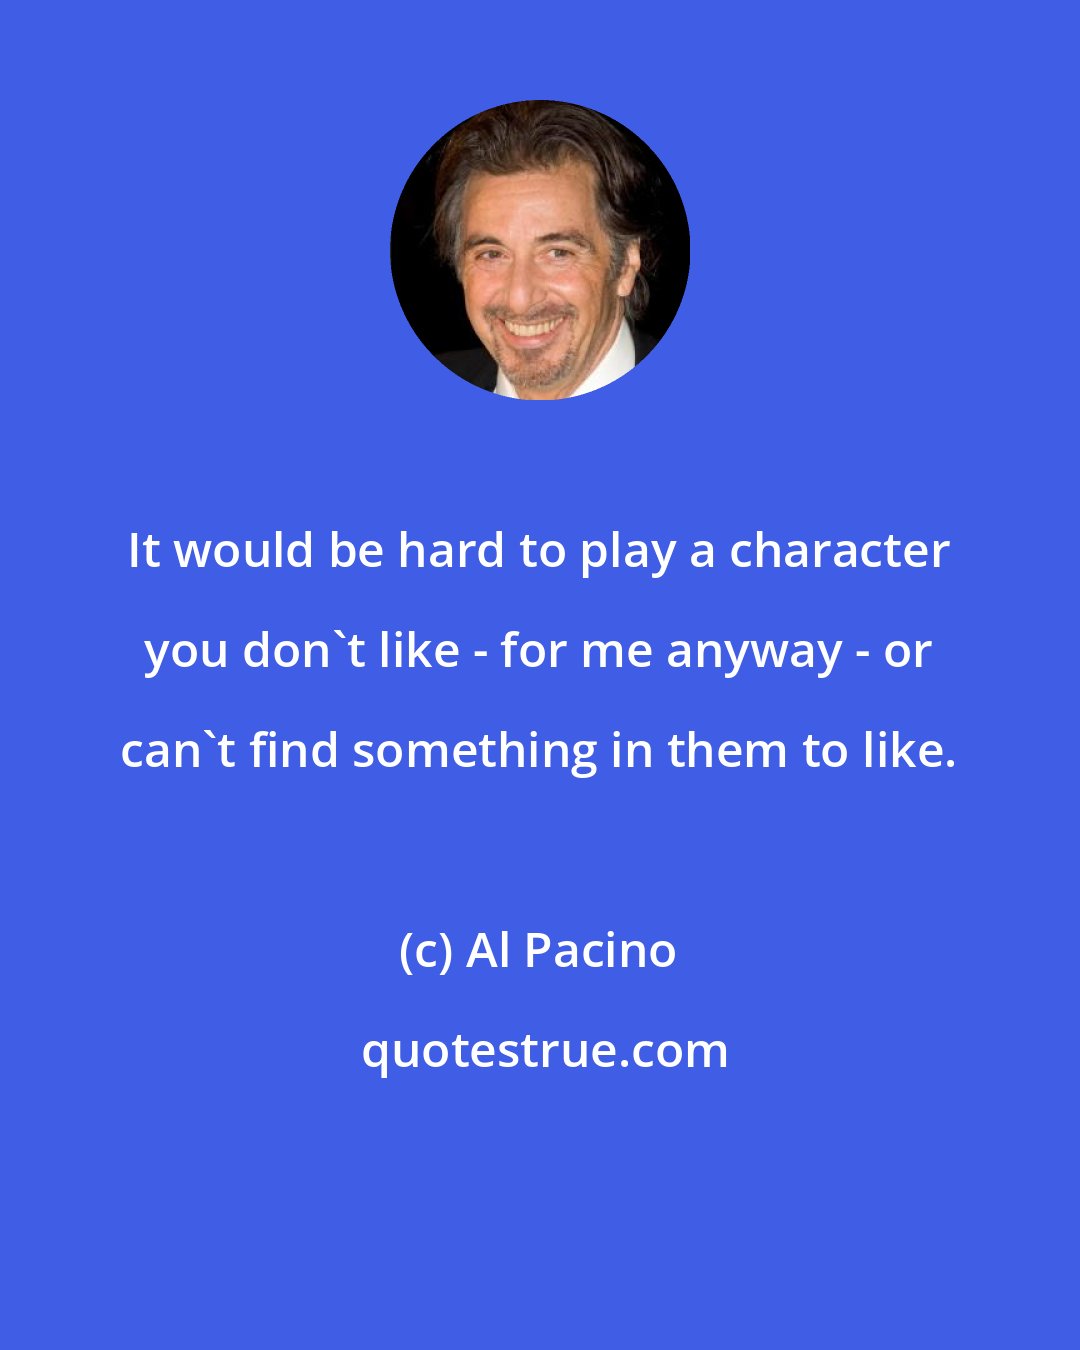 Al Pacino: It would be hard to play a character you don't like - for me anyway - or can't find something in them to like.